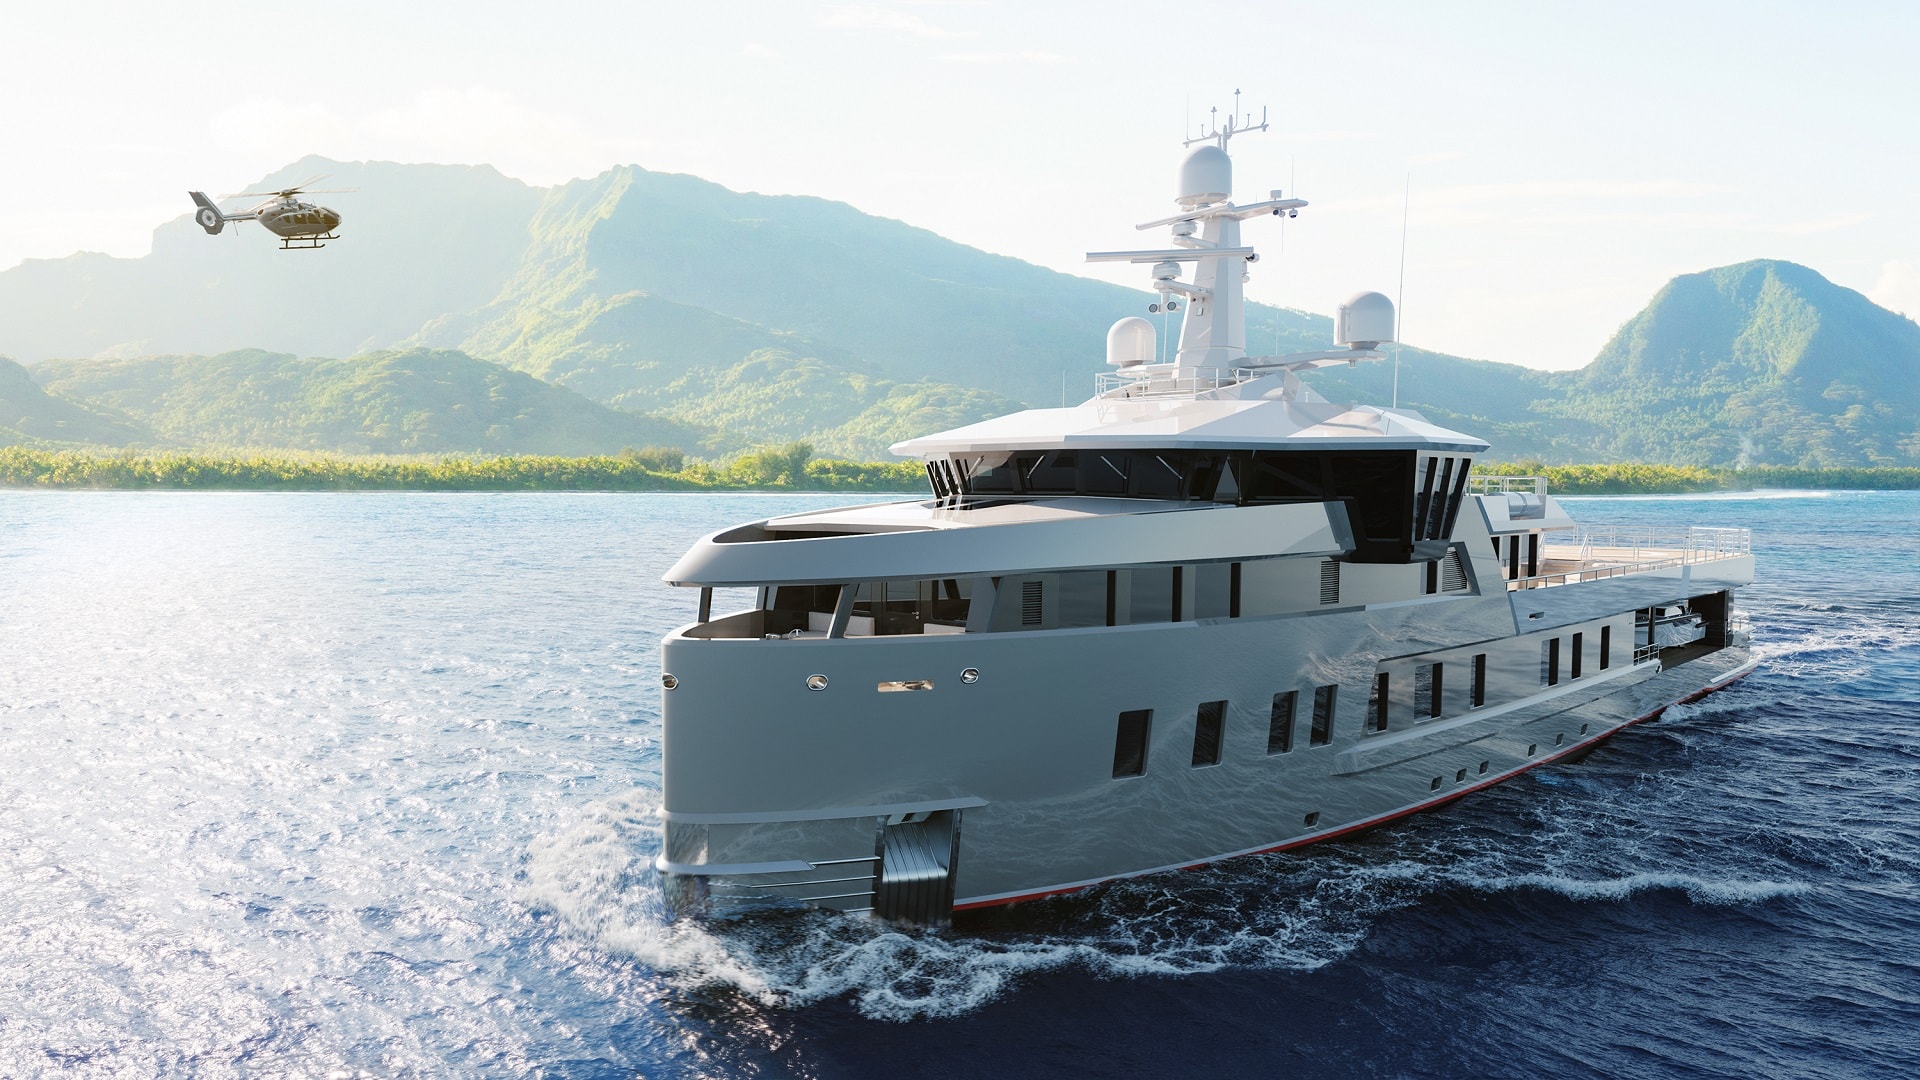 Damen’s Fourth Luxury SeaXplorer Is in the Works, Will Be a 200-Ft Yacht for All Seasons